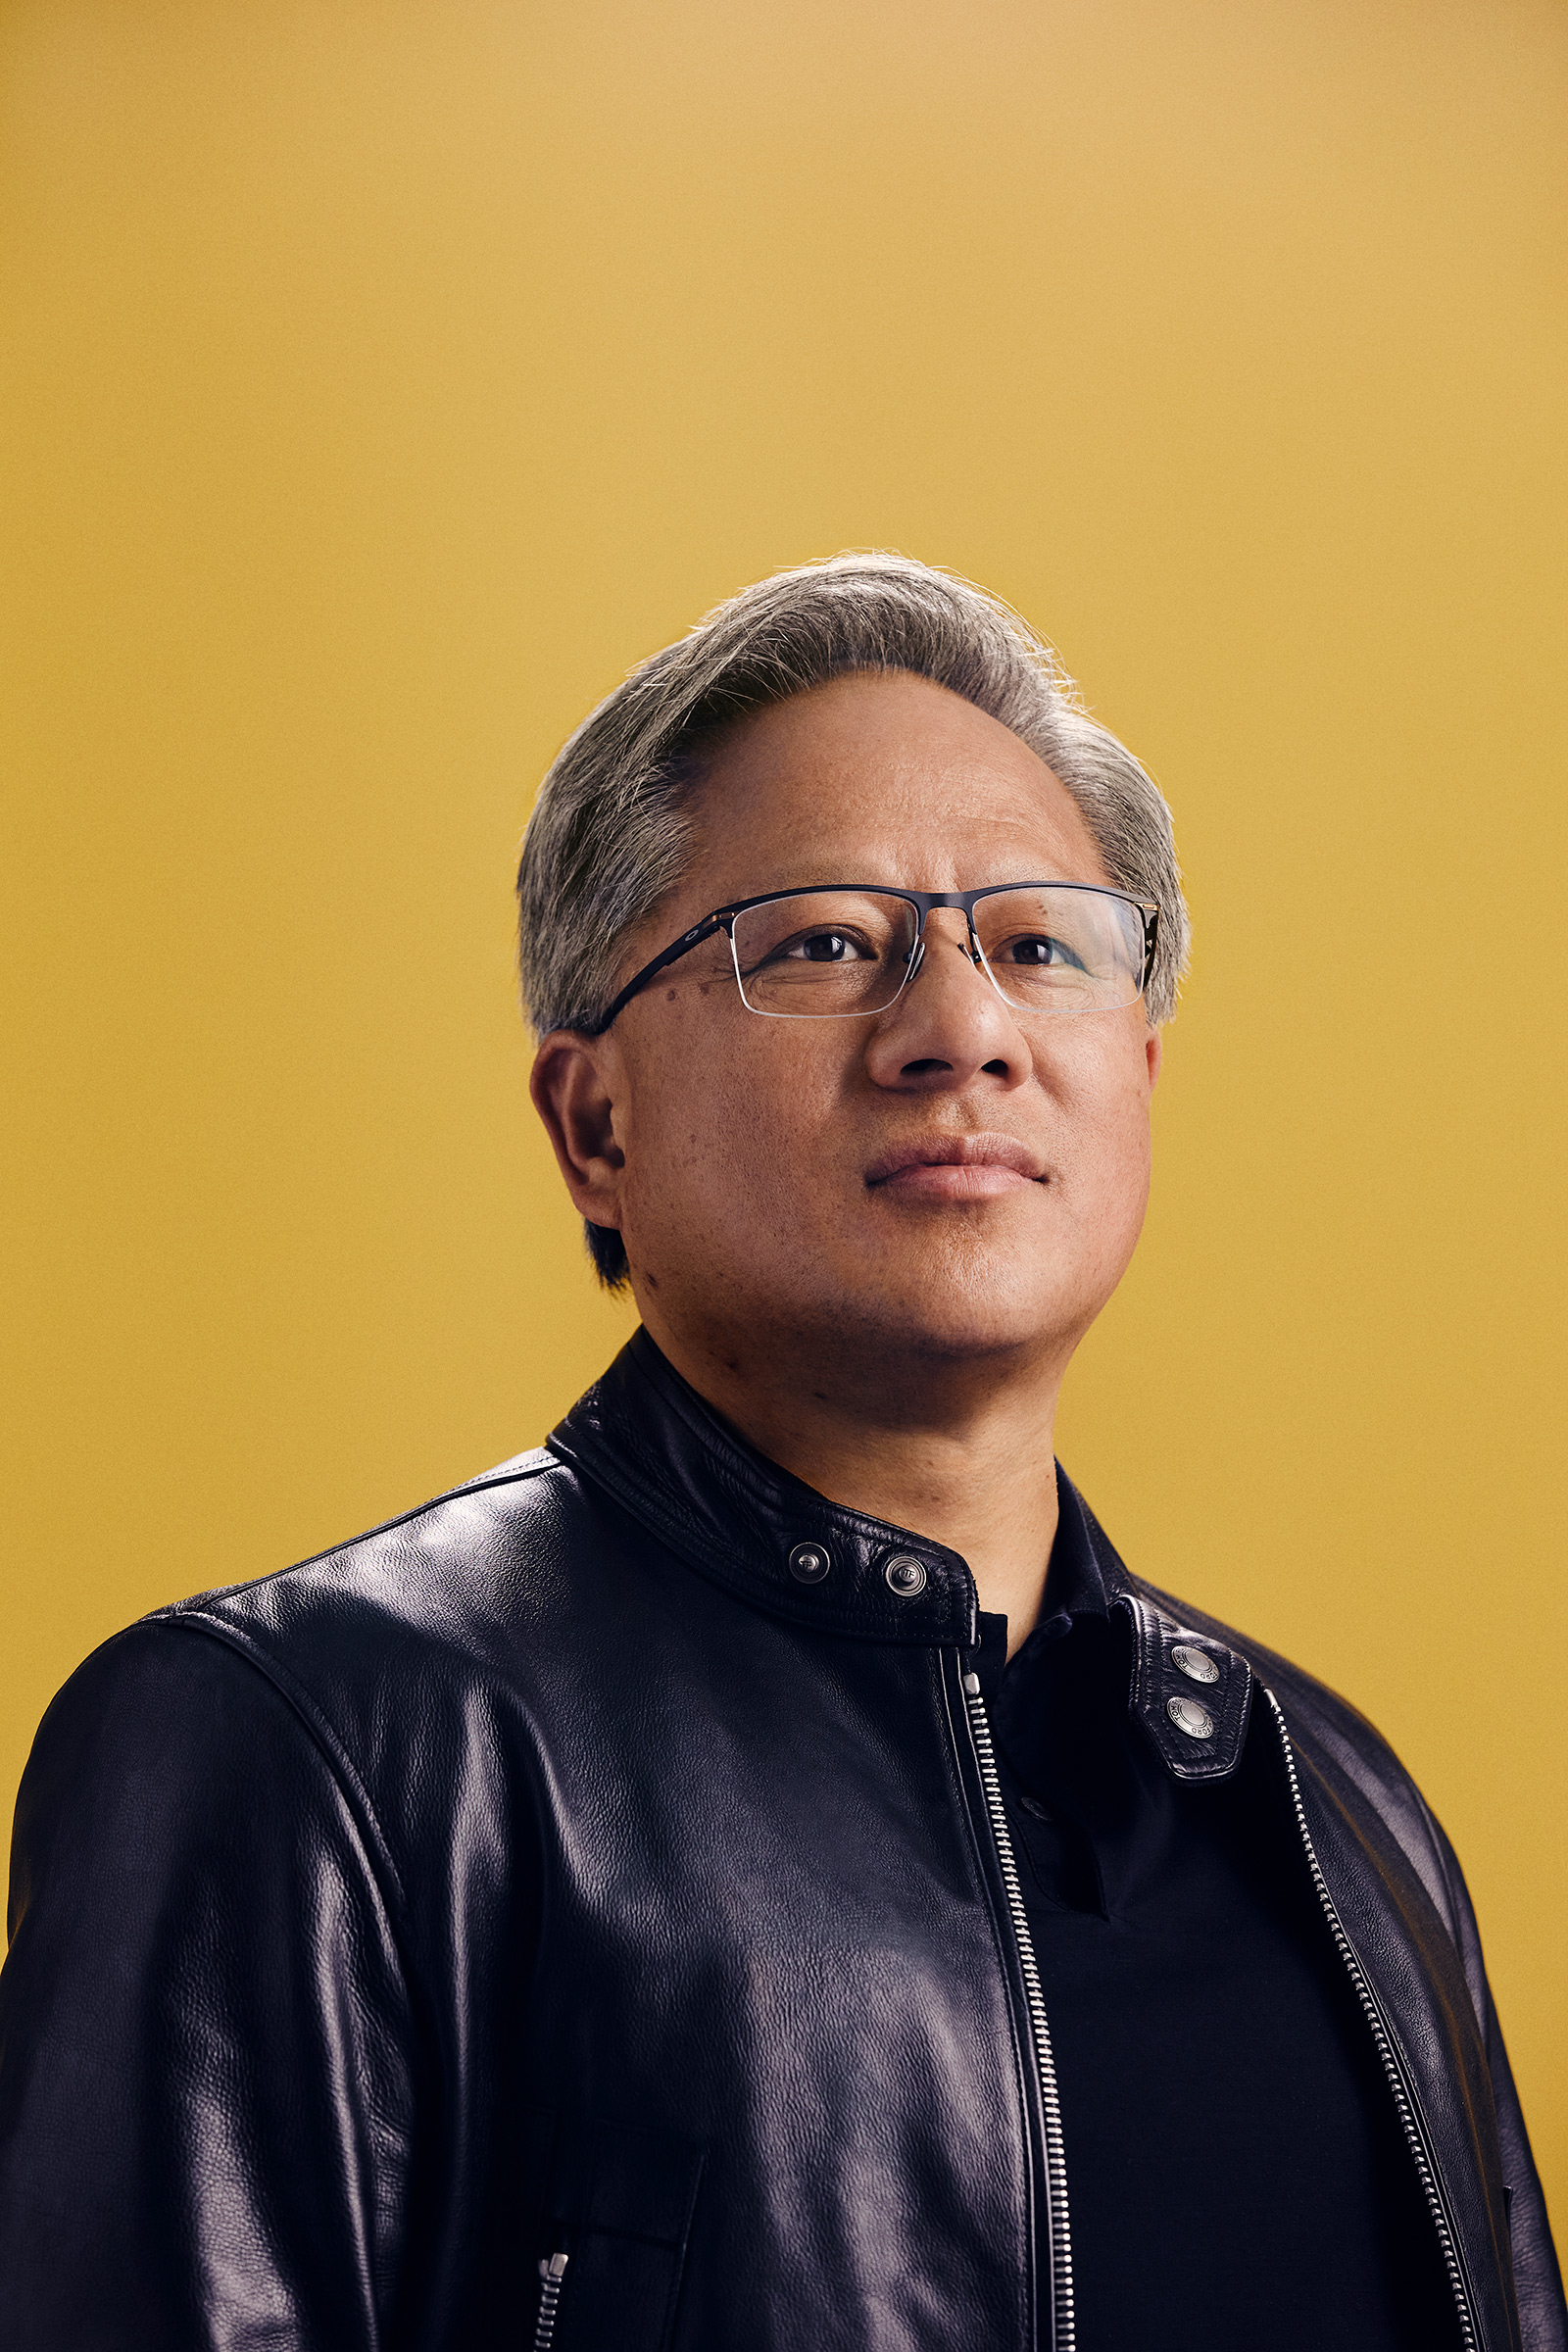 Jensen Huang Is On The 2021 Time100 List | Time